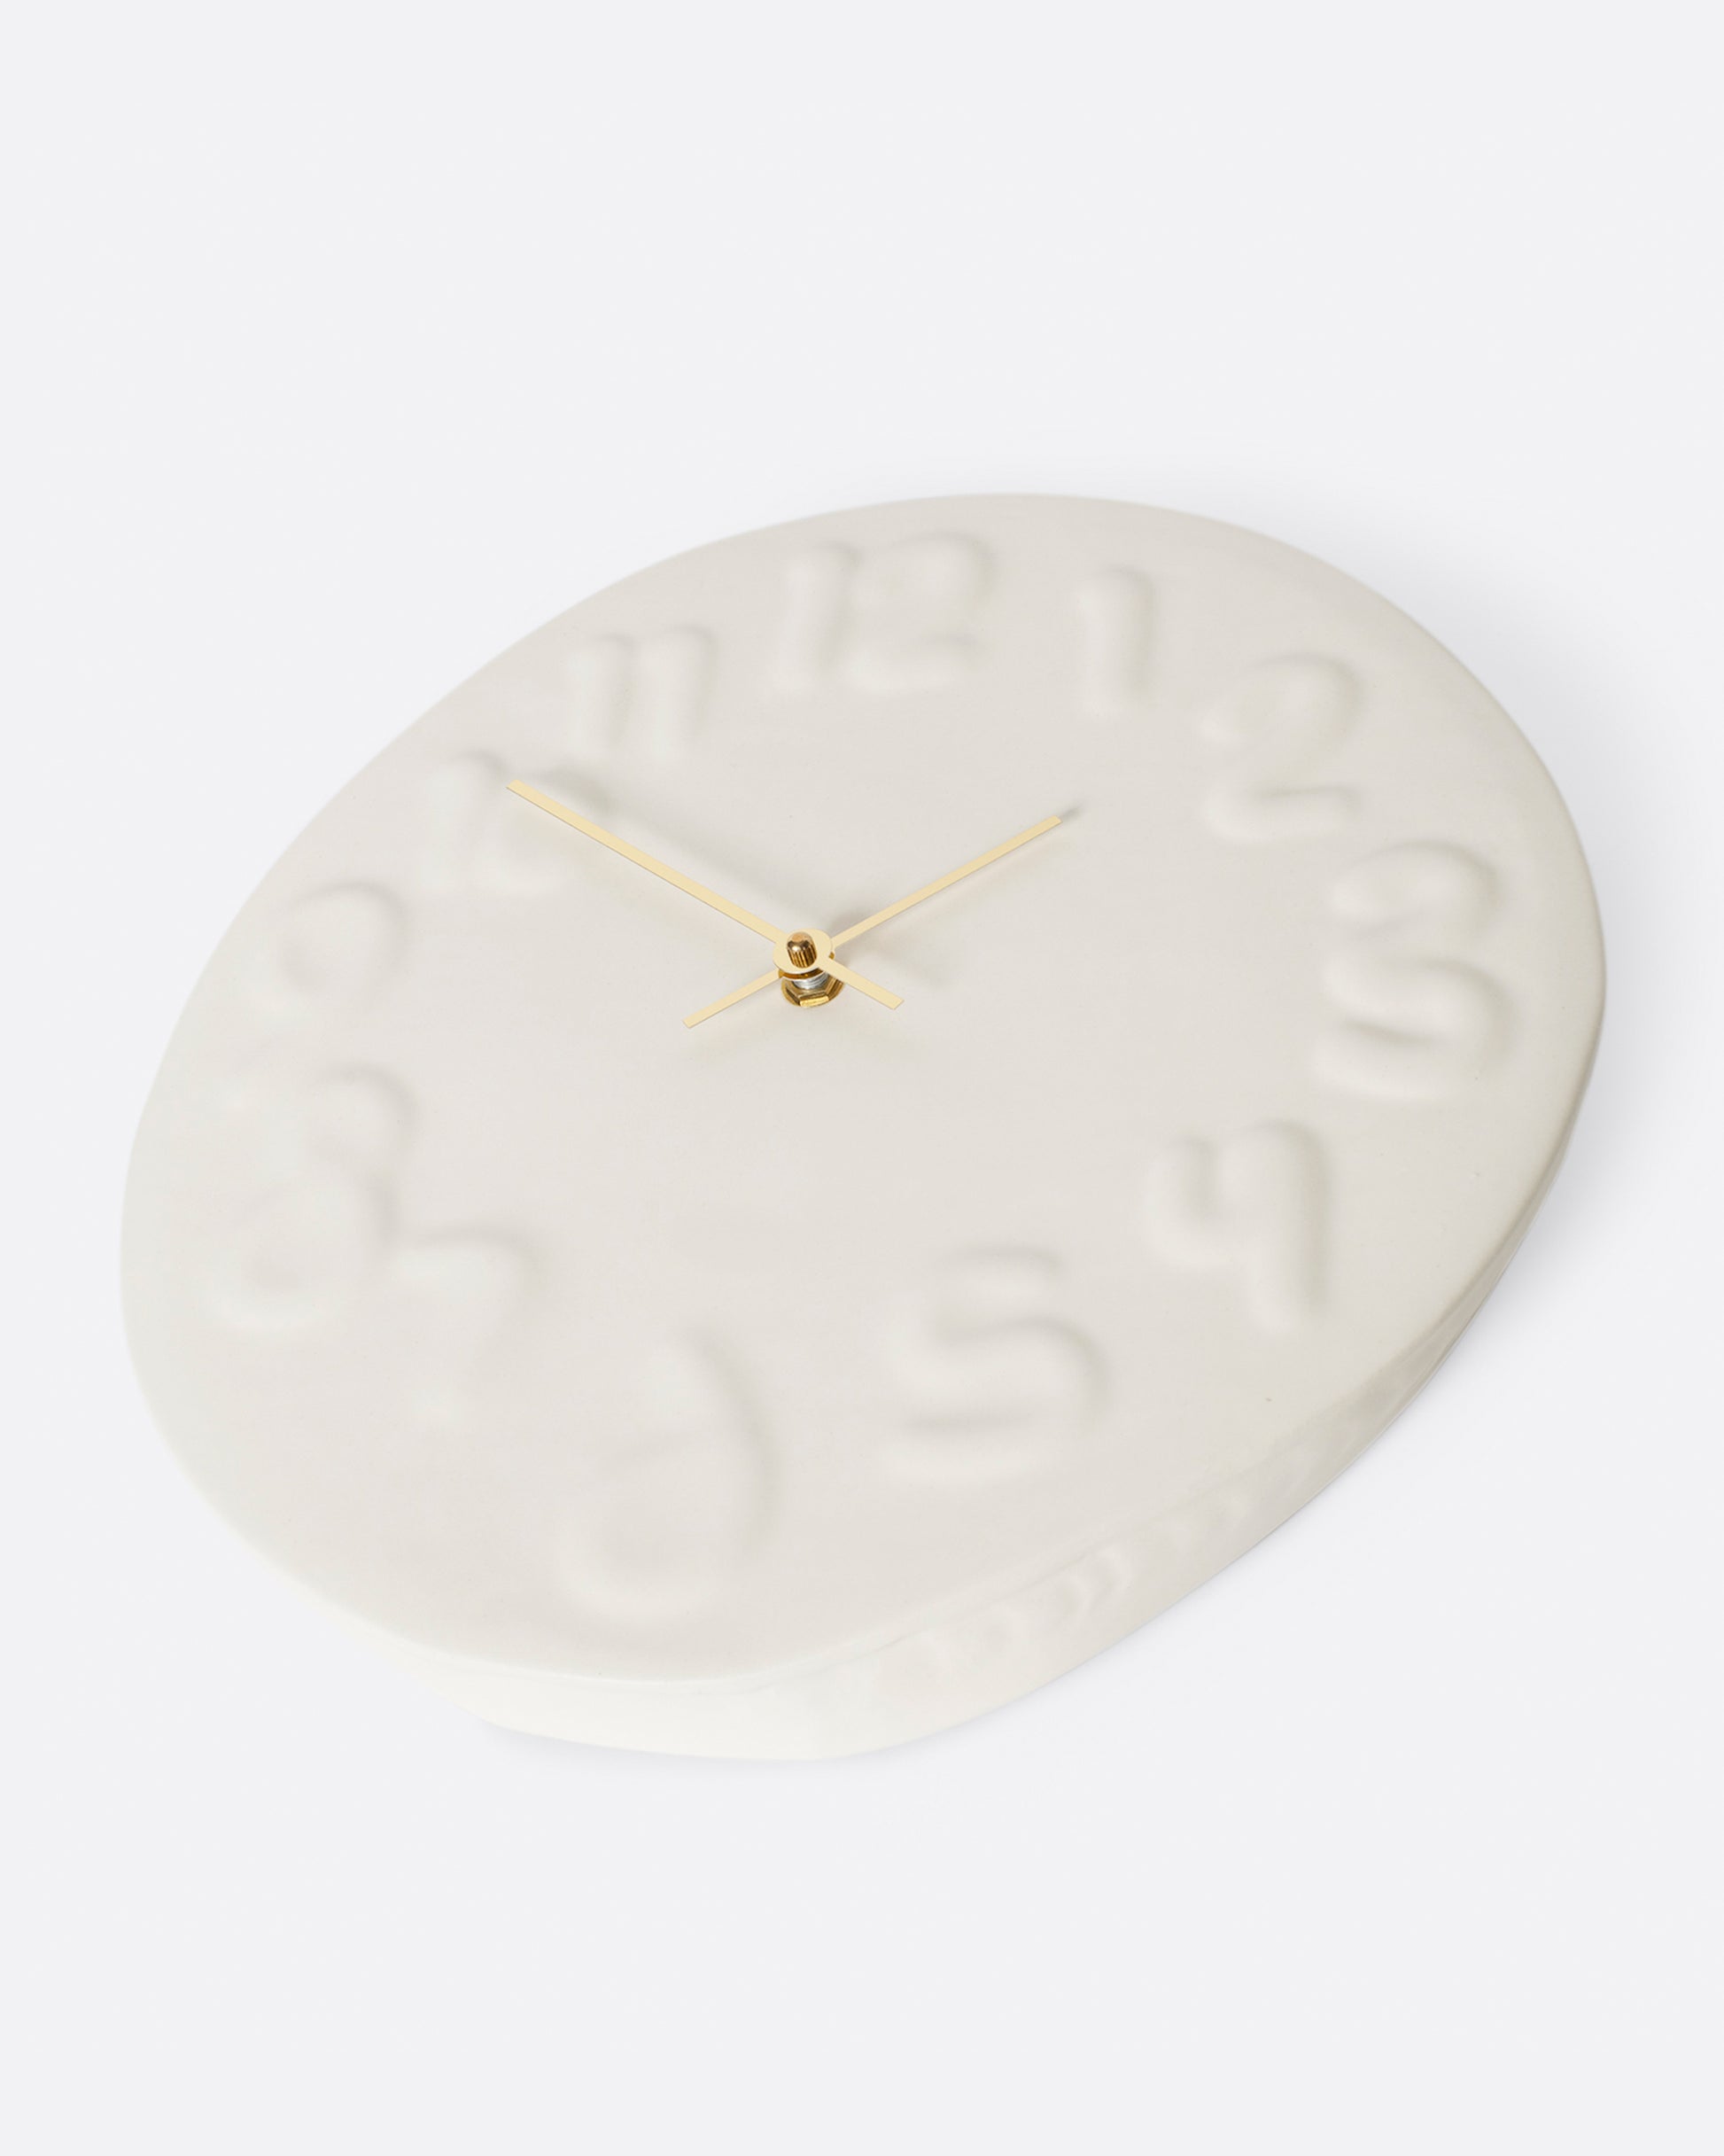 This handmade clock has brass hands and is a fun, yet subtle addition to any wall.